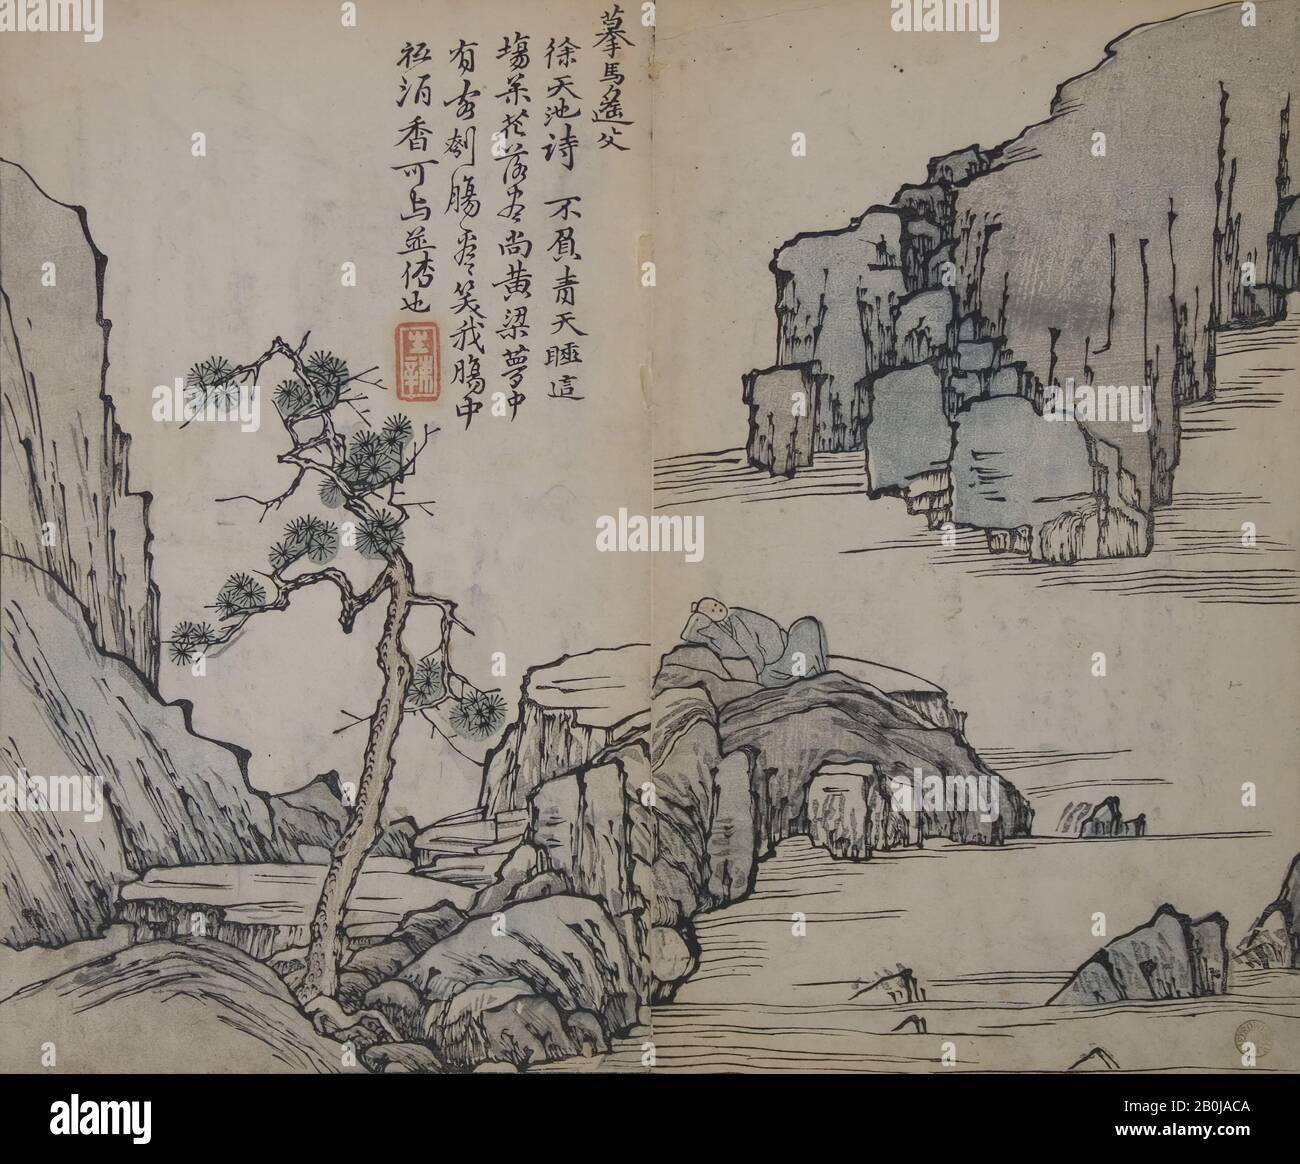 Designed by Wang Gai, Landscape after Ma Yuan (active ca. 1190–1225), from the Mustard Seed Garden Manual of Painting, China, Designed by Wang Gai (Chinese, 1645–1710), First edition, 1679, China, Woodblock print; ink and color on paper, 9 5/8 x 11 13/16 in. (24.4 x 30 cm), Prints Stock Photo